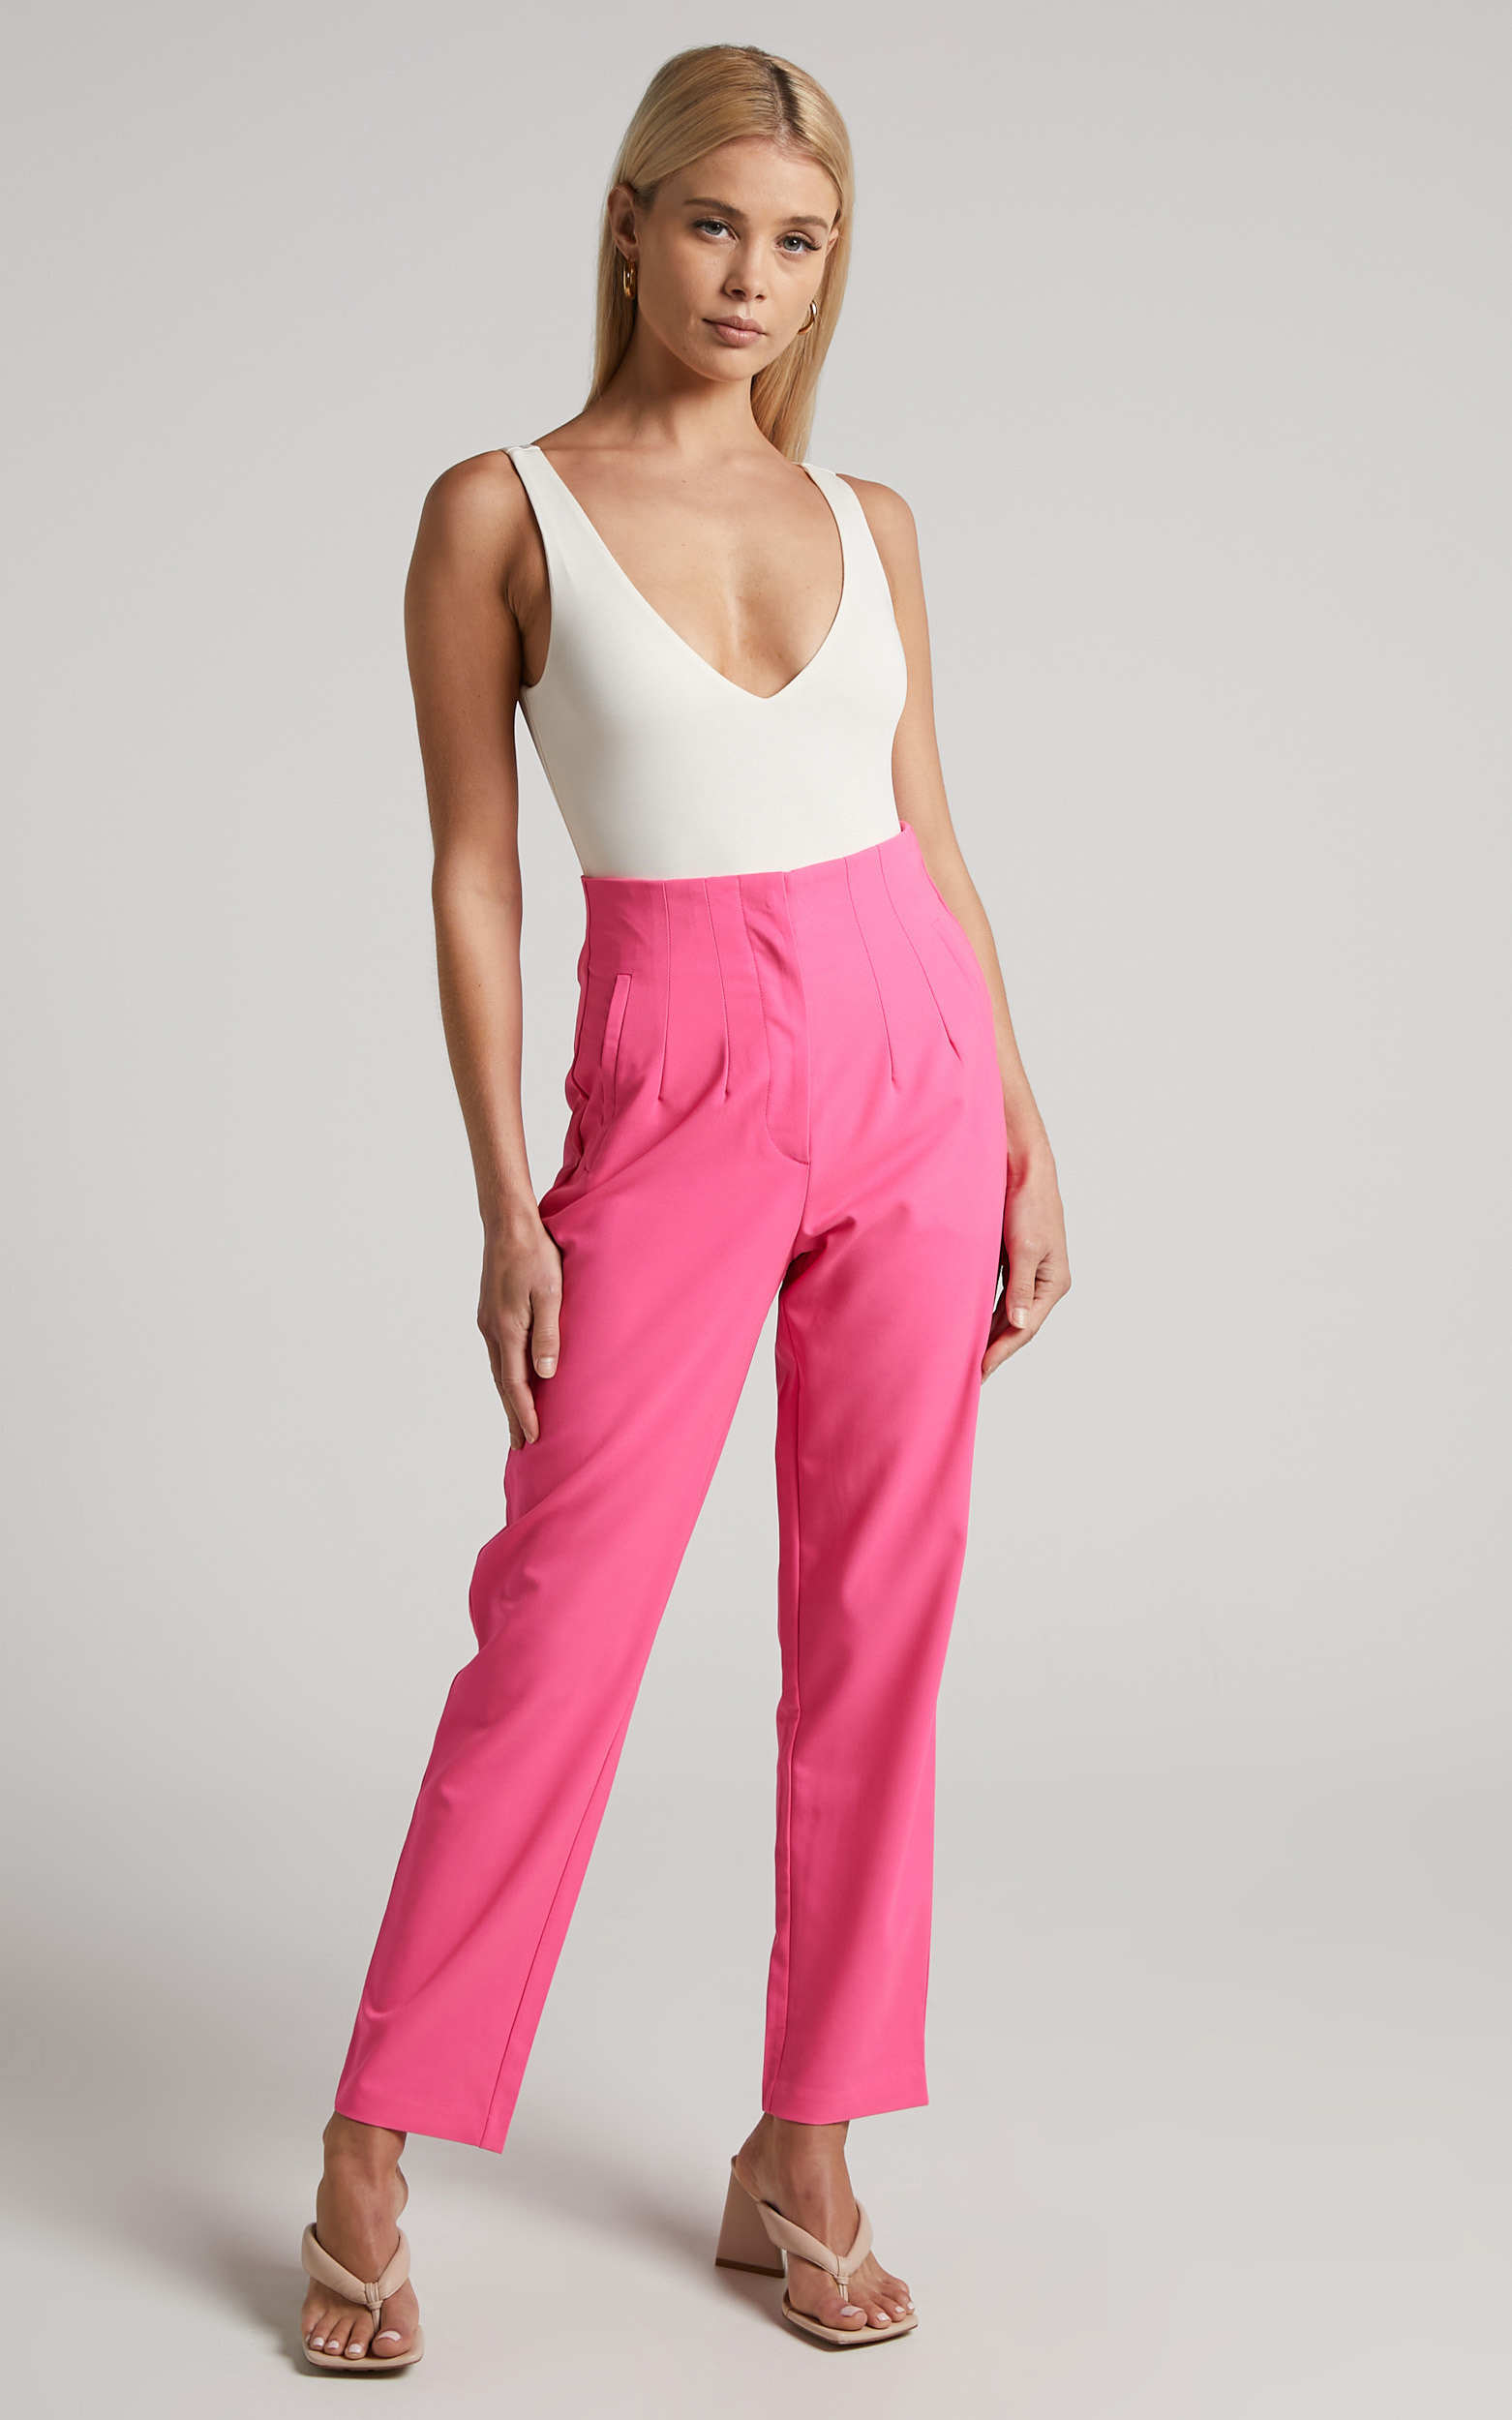 Abril Trousers - High Waisted Cropped Trousers in Hot Pink - 04, PNK1, hi-res image number null